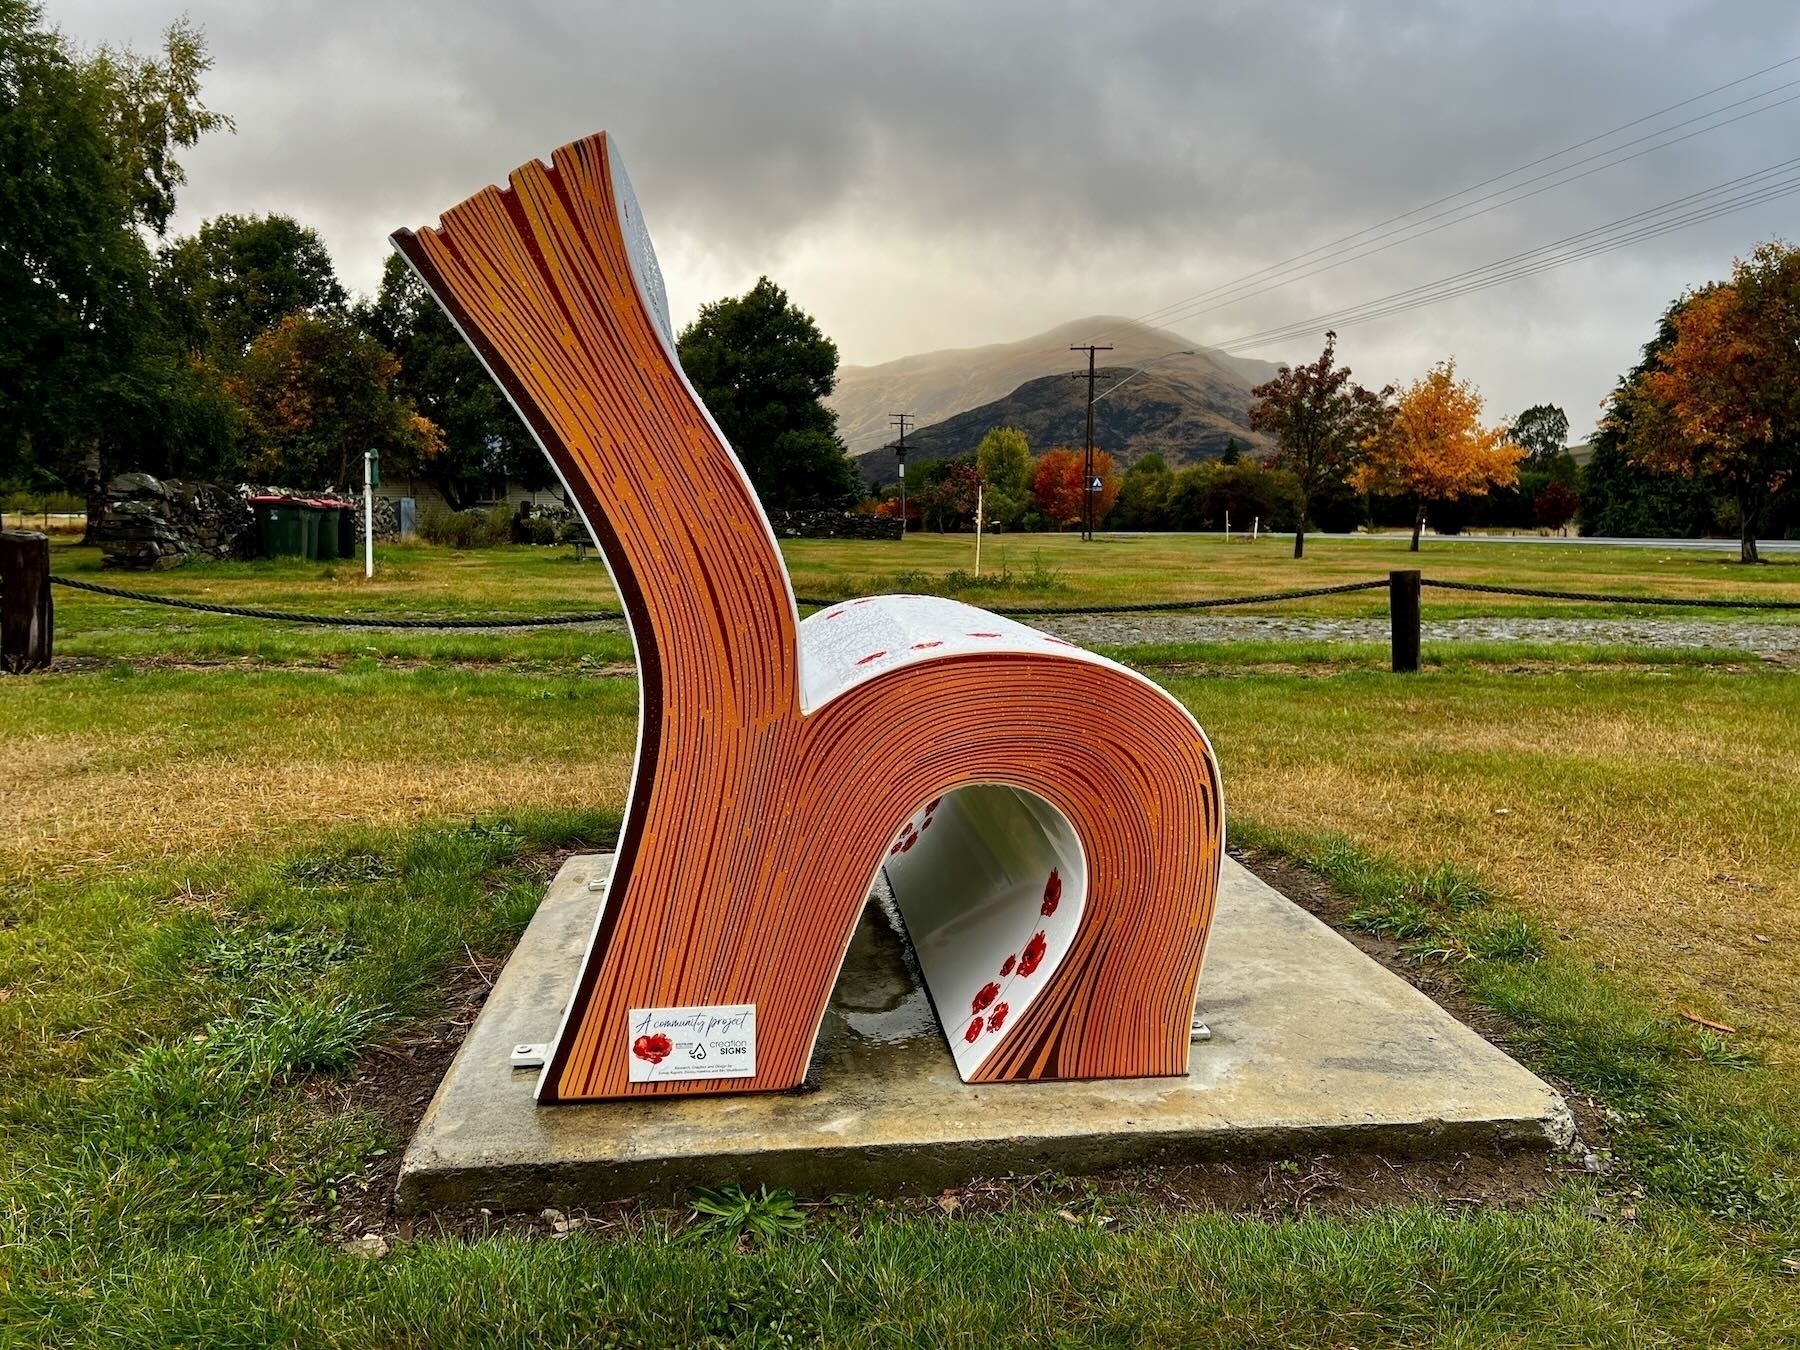 Athol RSA memorial seat shaped like an open book with some pages upright and others rolled over to form a seat.